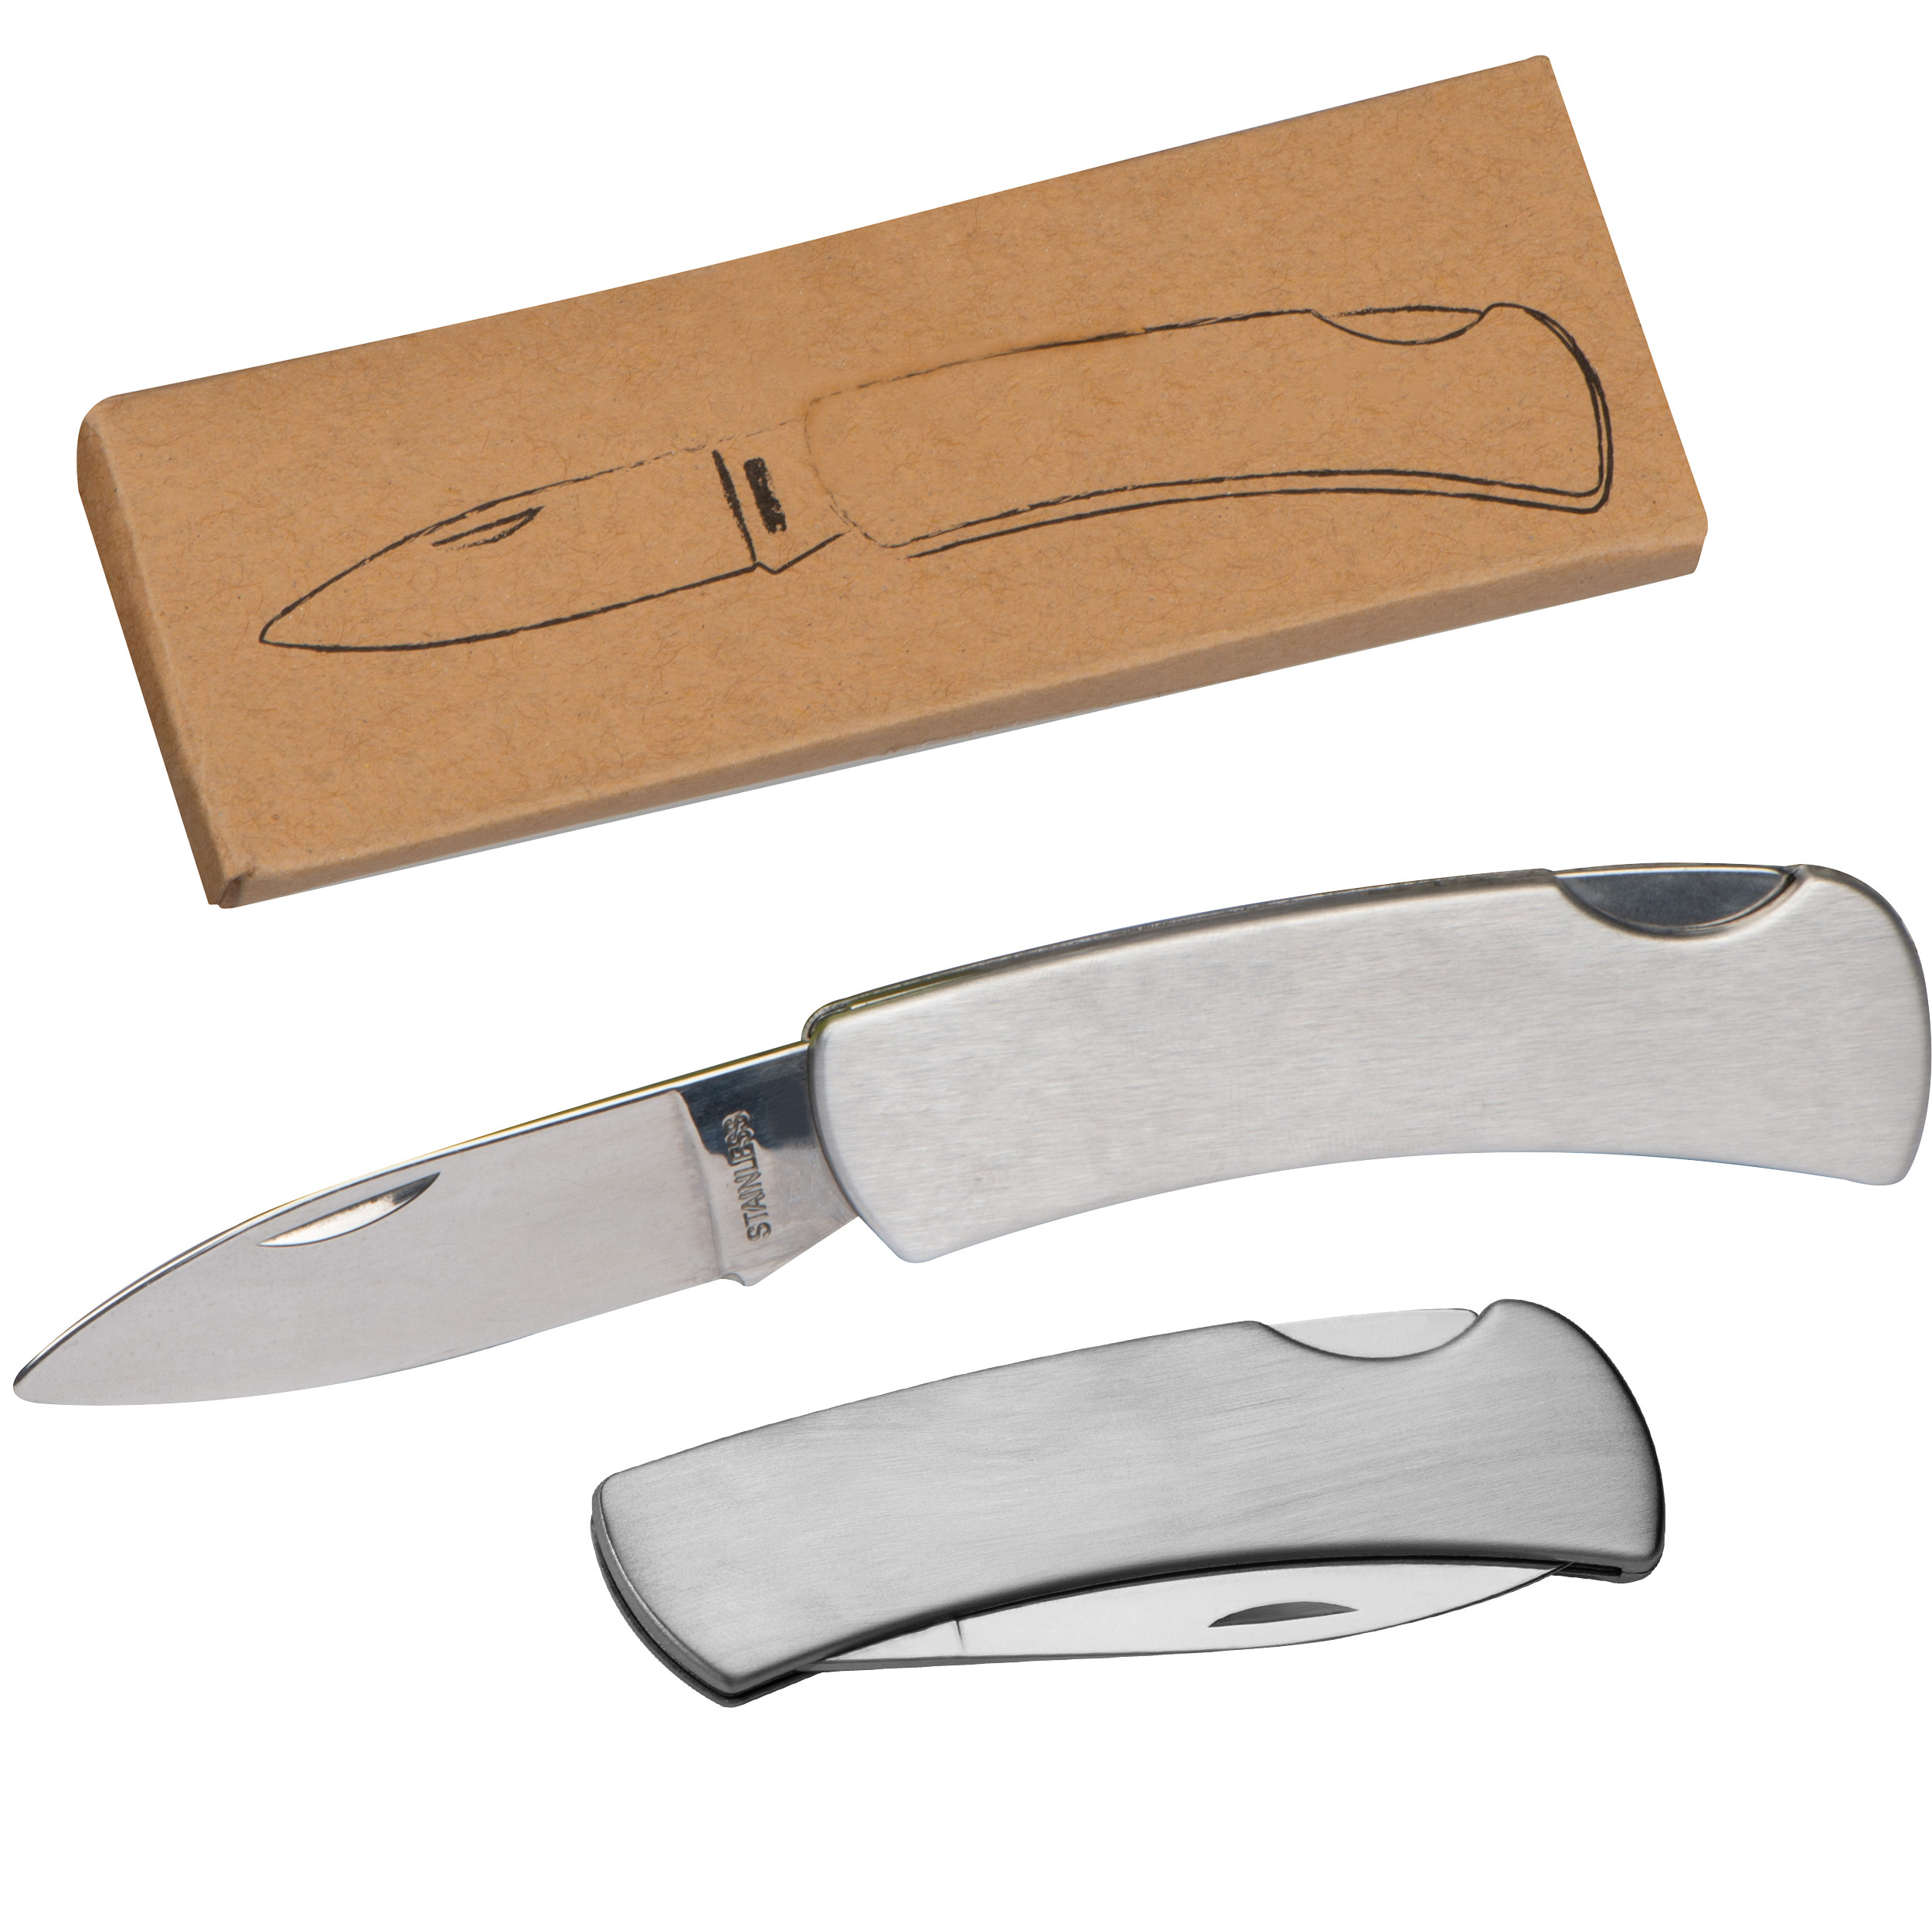 Pocket knife with safety lock